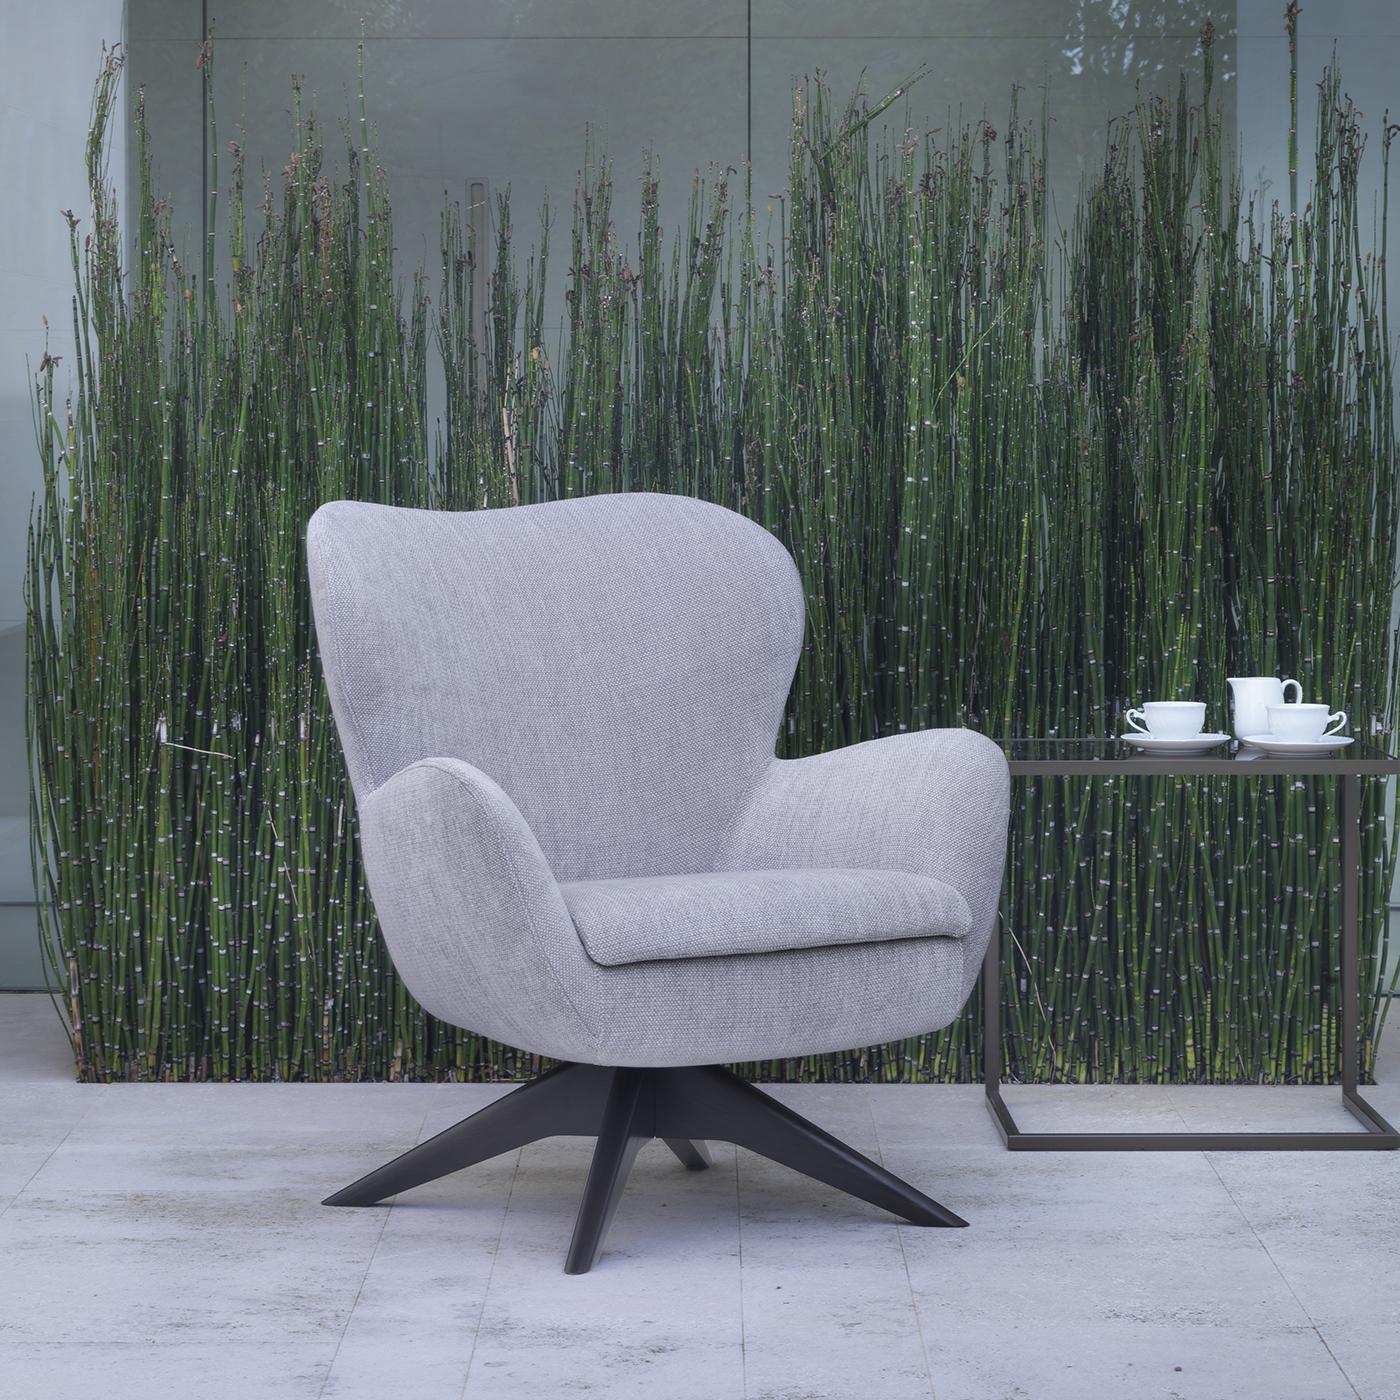 This armchair is defined by soft lines and enveloping shapes. It comes with a standard, fixed base or in a swivel version, both in the choice of wood or chrome. It features a steel body structure, seat with wooden inserts and cold-moulded